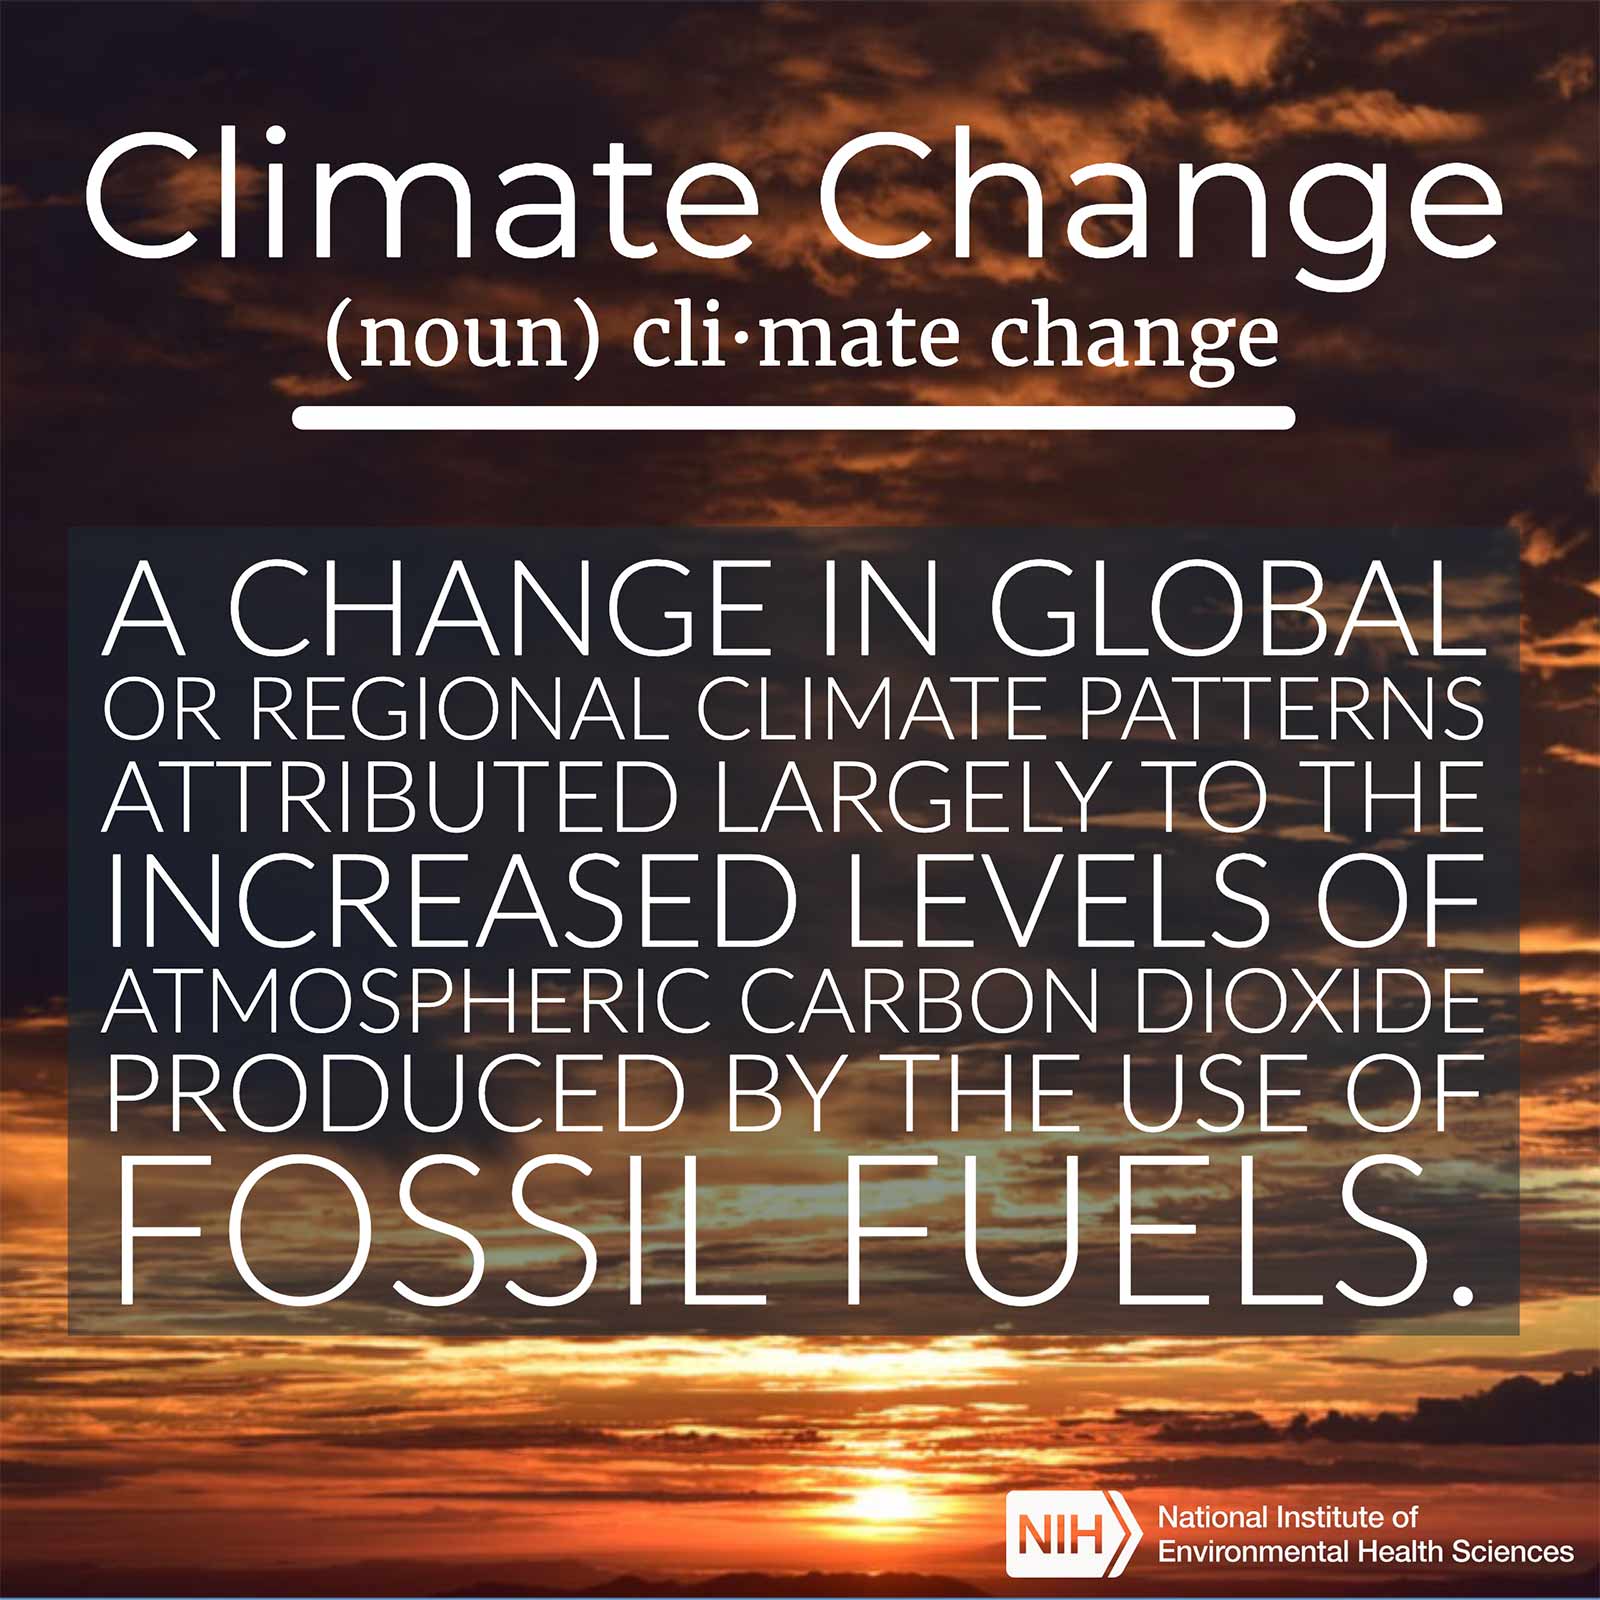 Climate change (noun) defined as &#39;A change in global or regional climate patterns attributed largely to the increased levels of atmospheric carbon dioxide produced by the use of fossil fuels&#39;